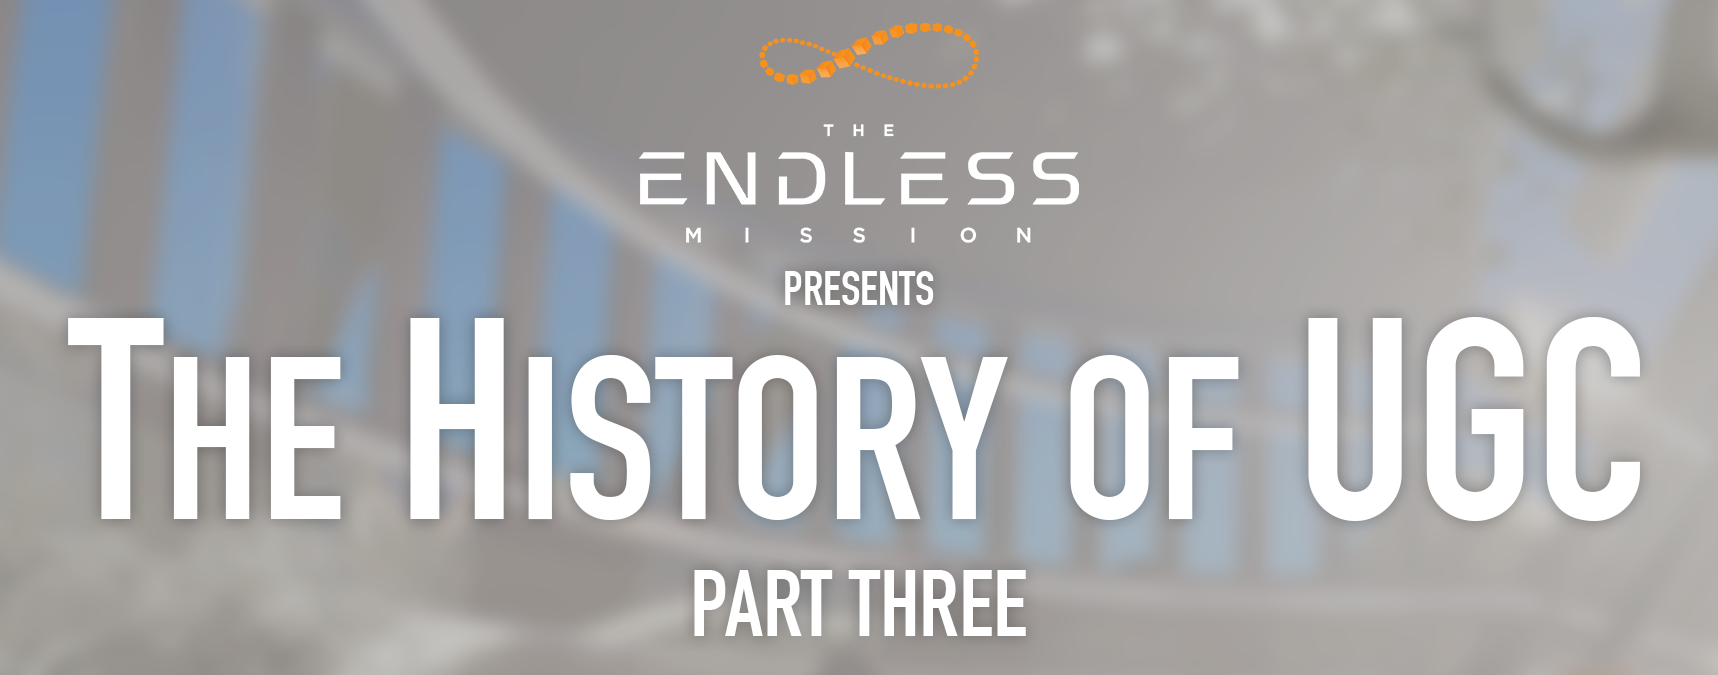 The Endless Mission The Endless Mission And The History Of Ugc Part 3 Steam News - epic scripts the sequel roblox